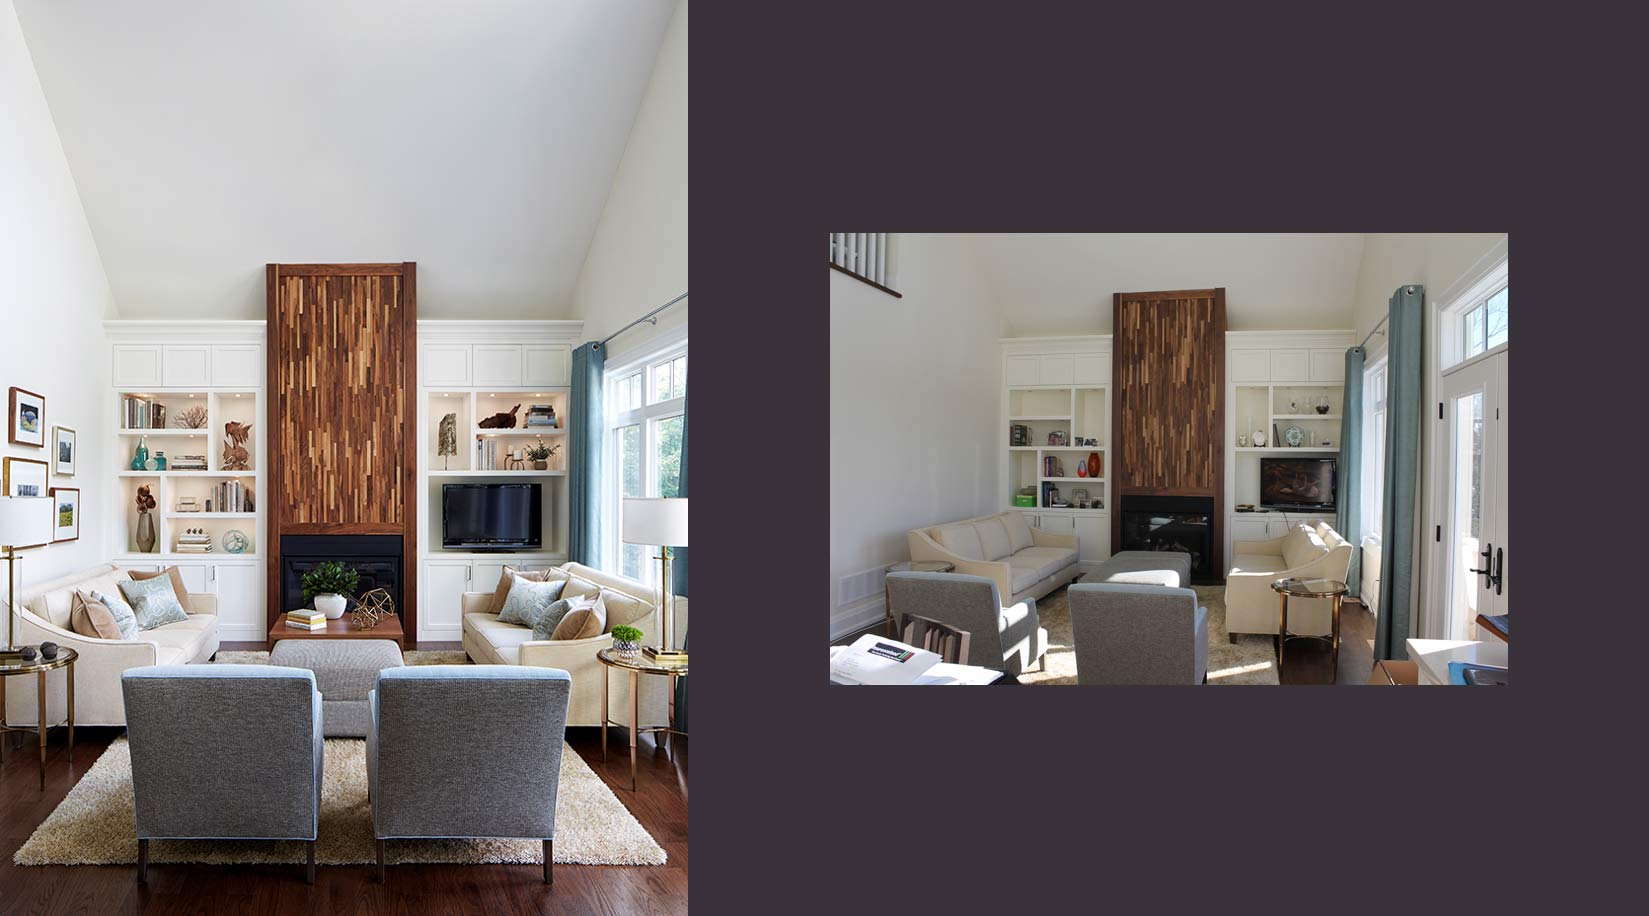 A before and after image of a living room, with and without accessories.